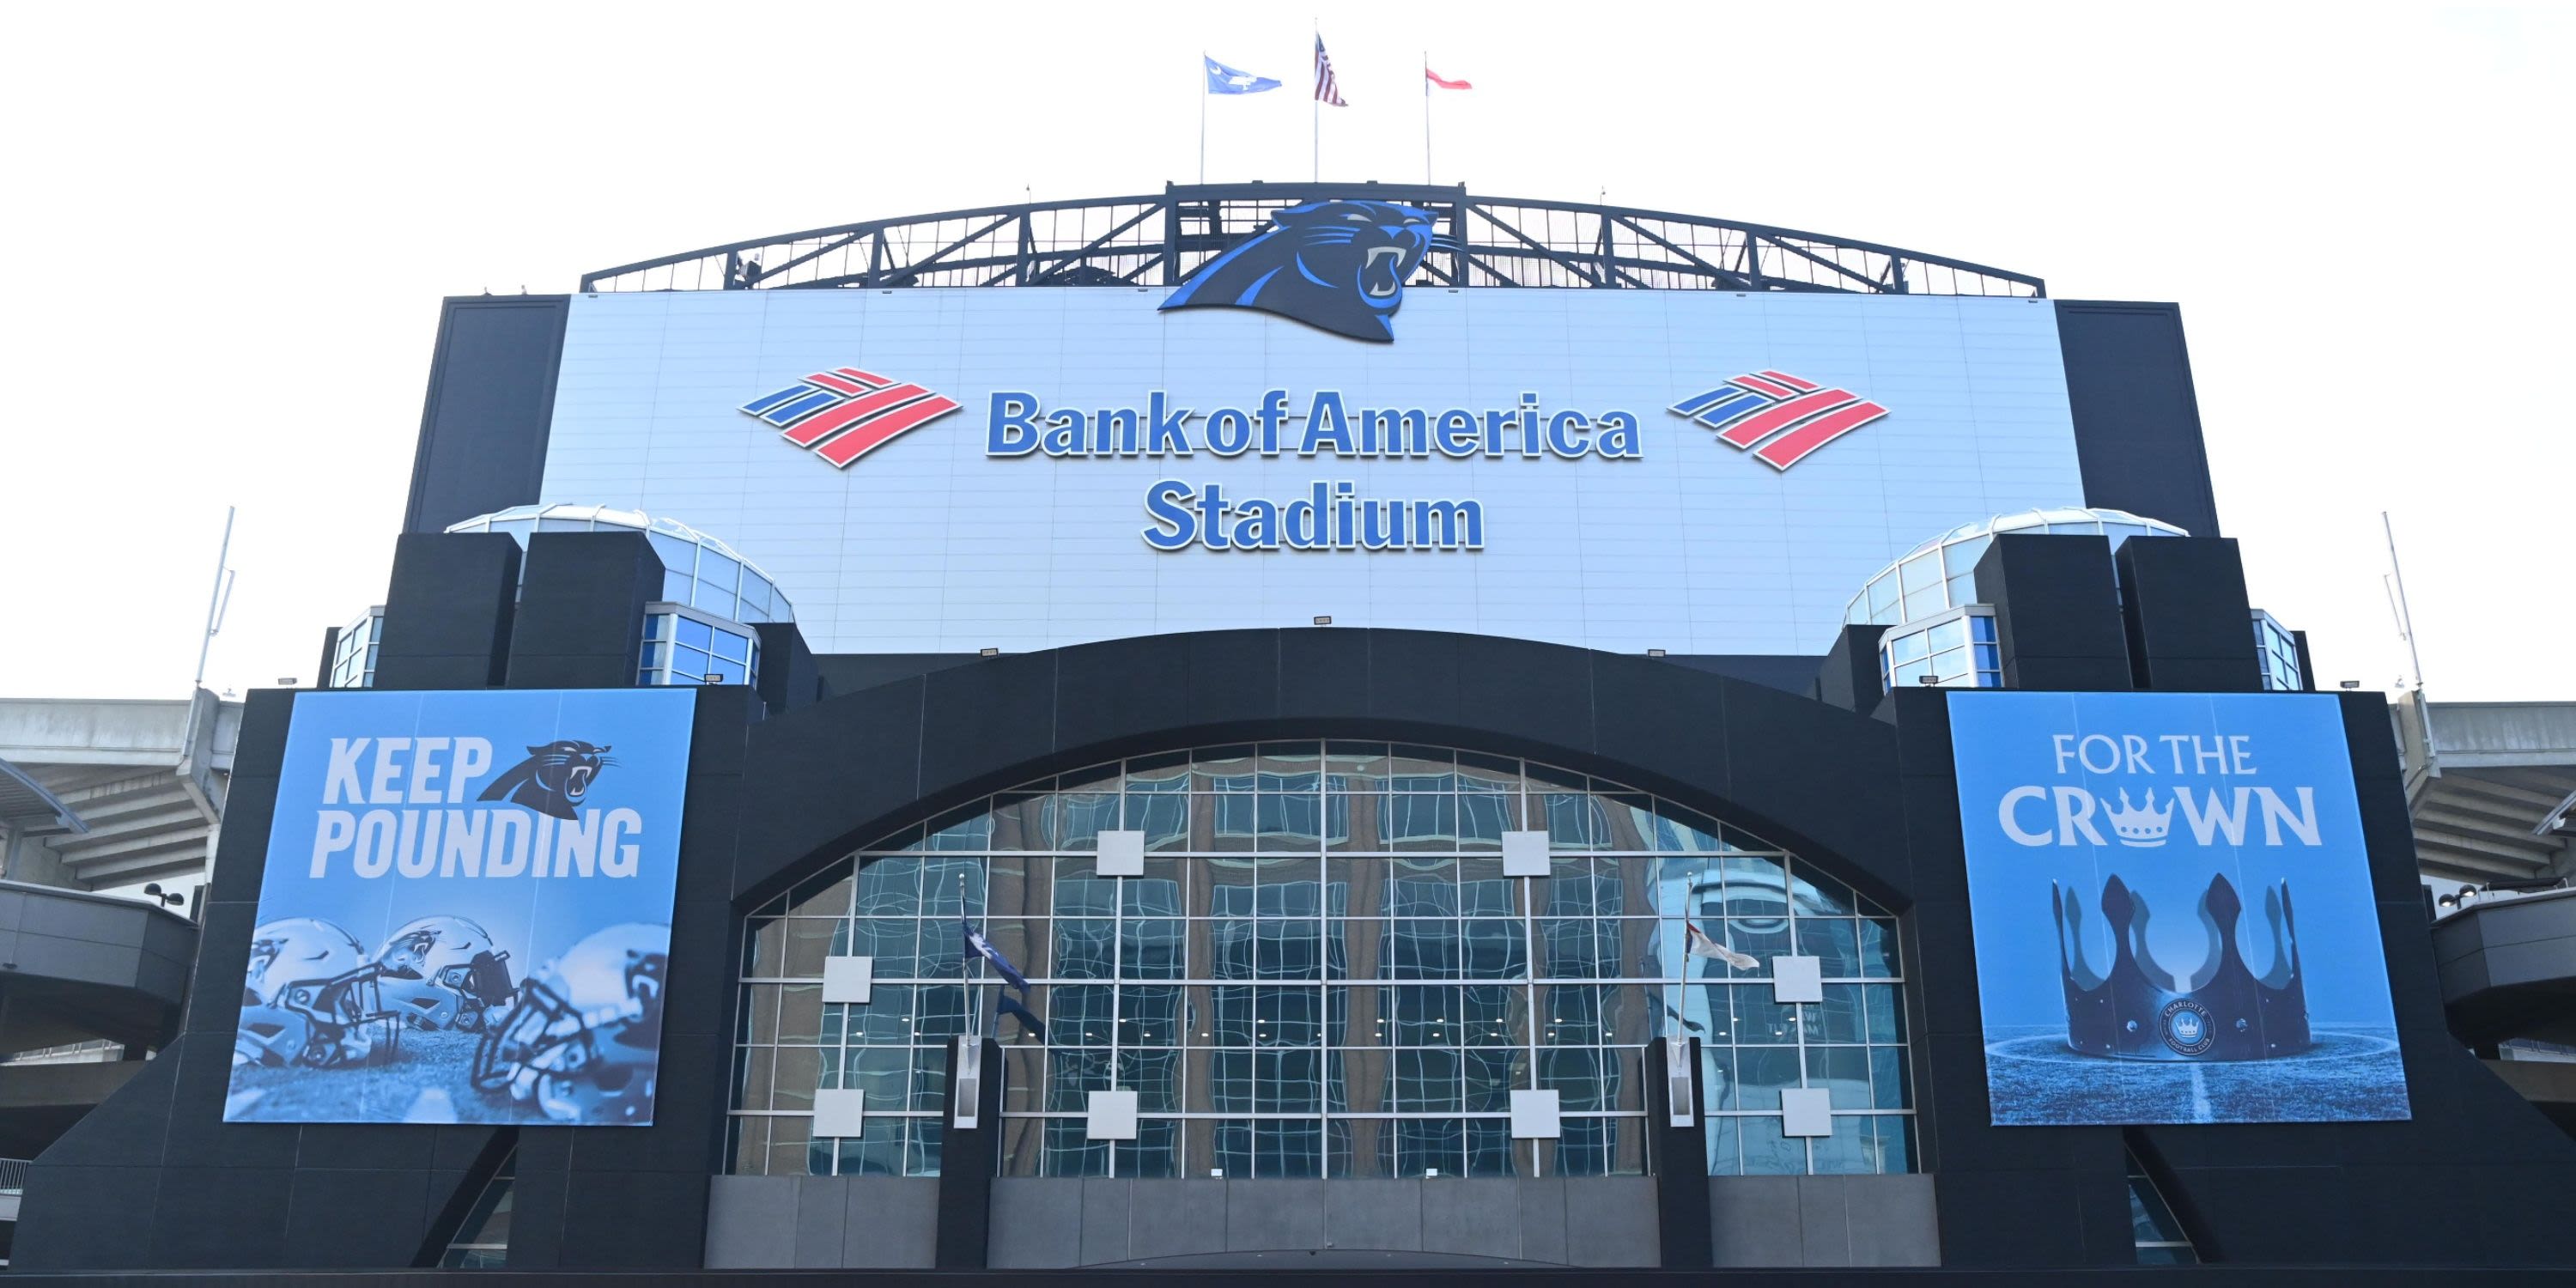 Panthers Announce Plans for Stadium Upgrade